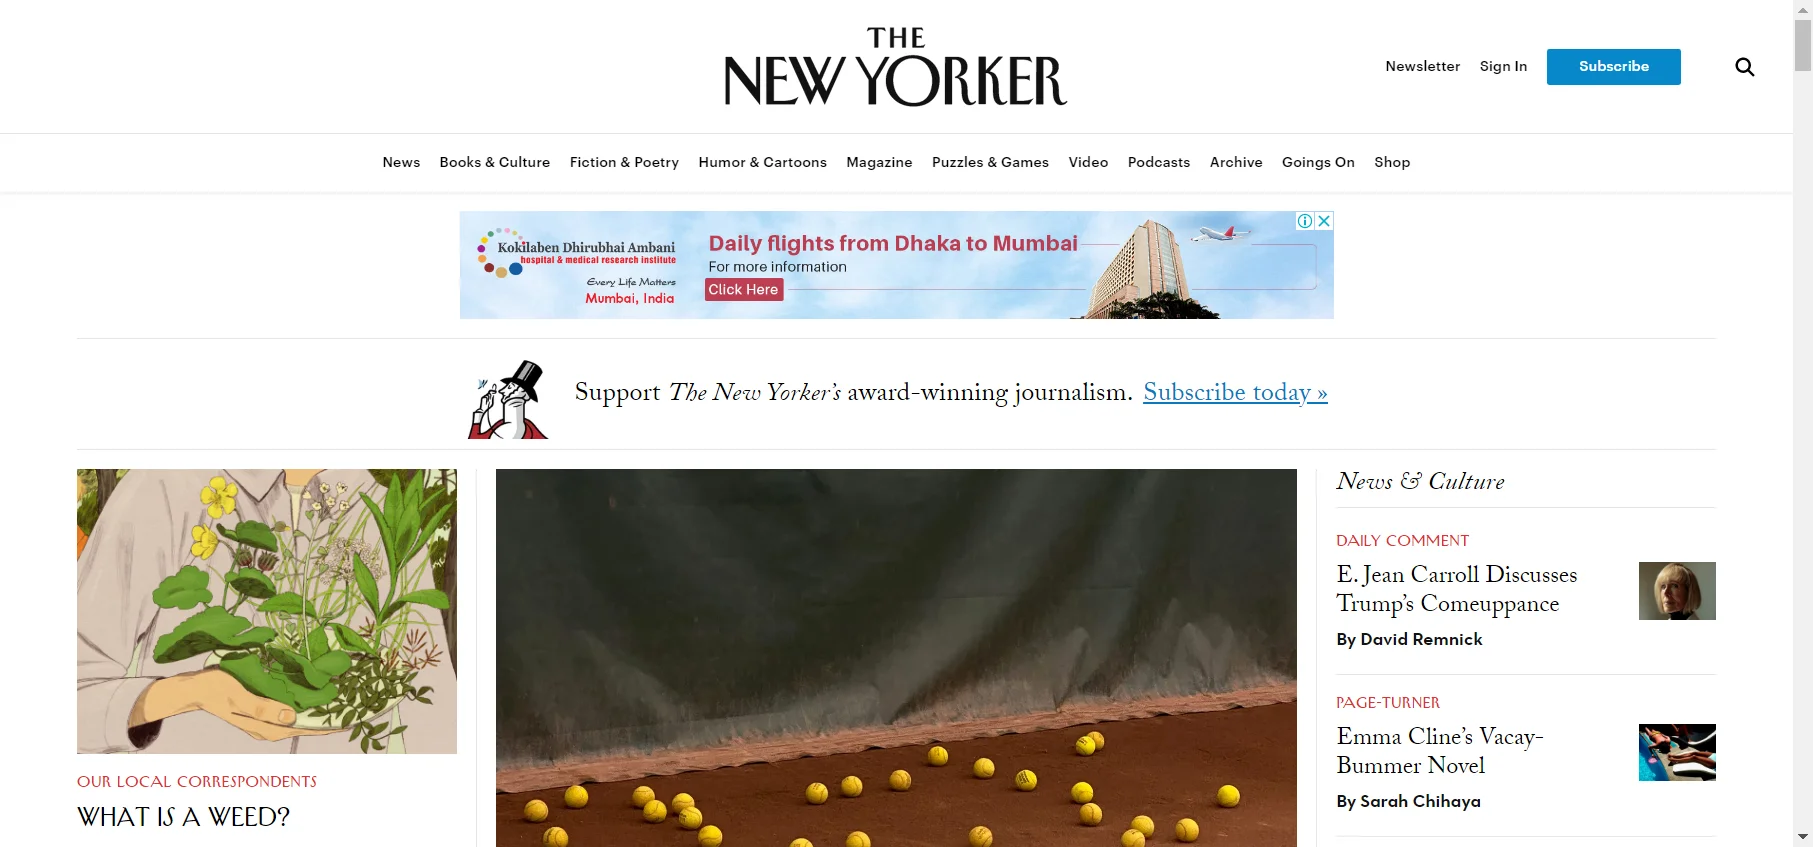 The New Yorker: